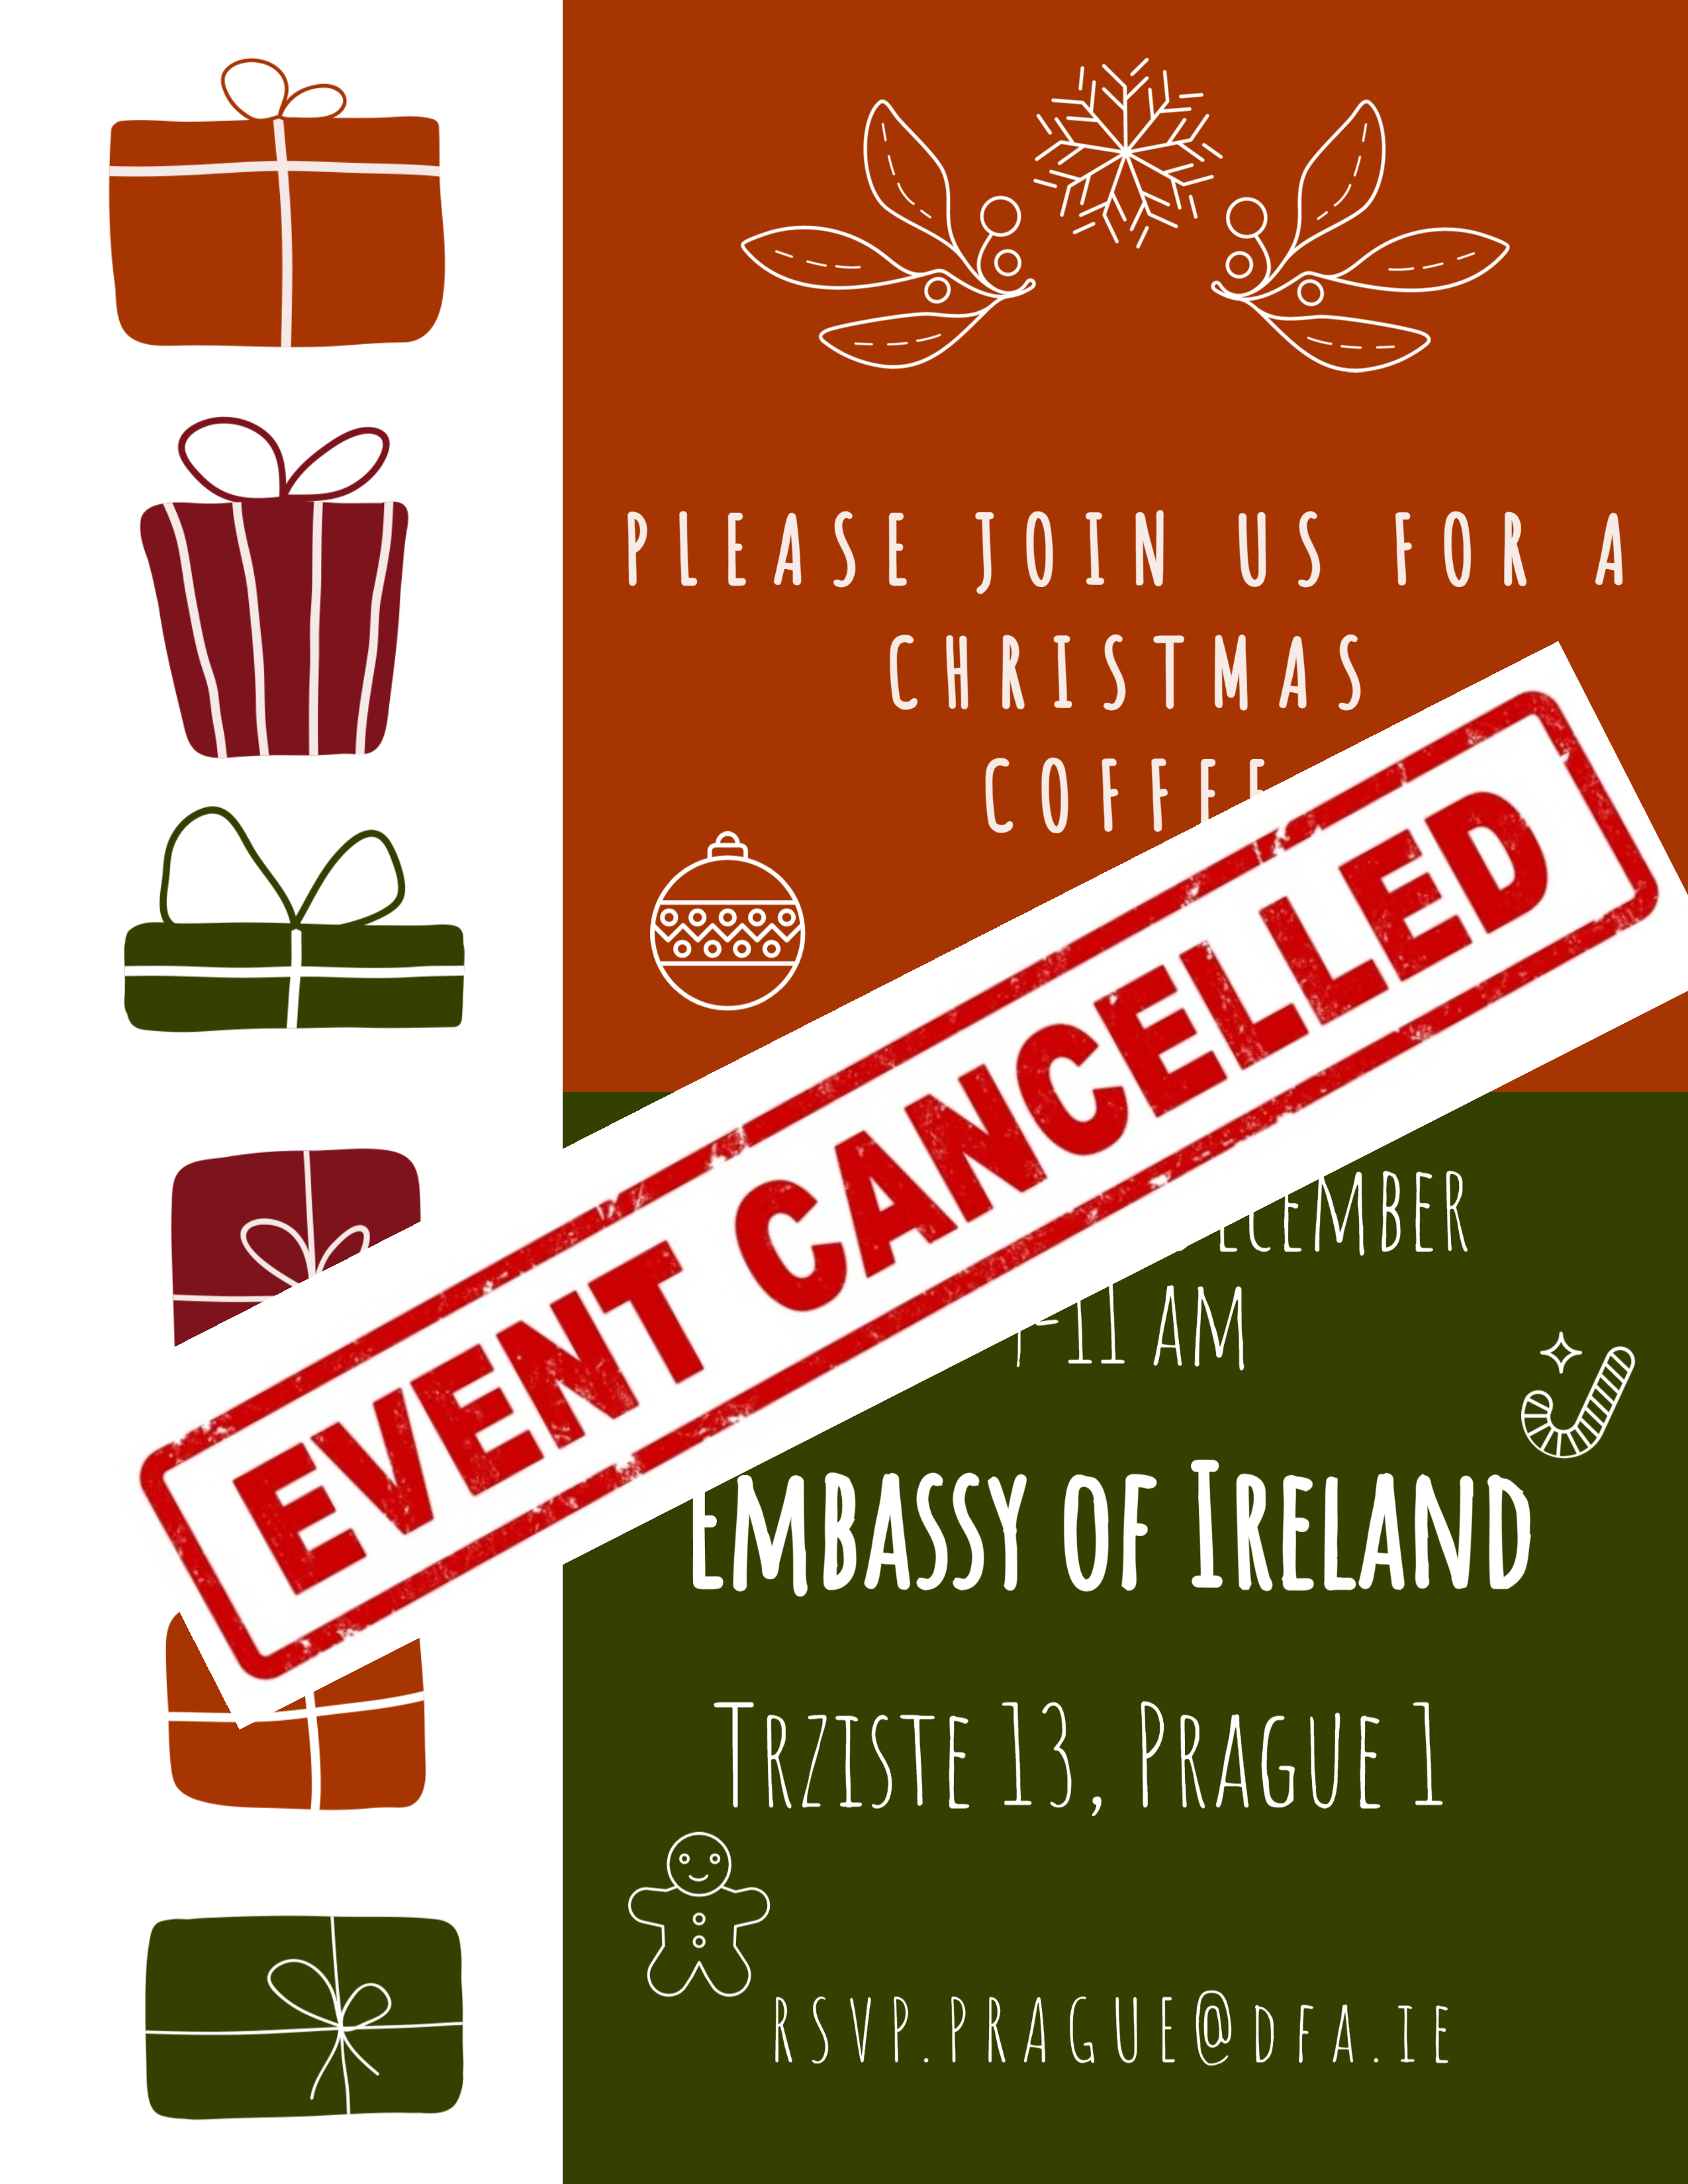 Christmas Coffee Morning at the Embassy 